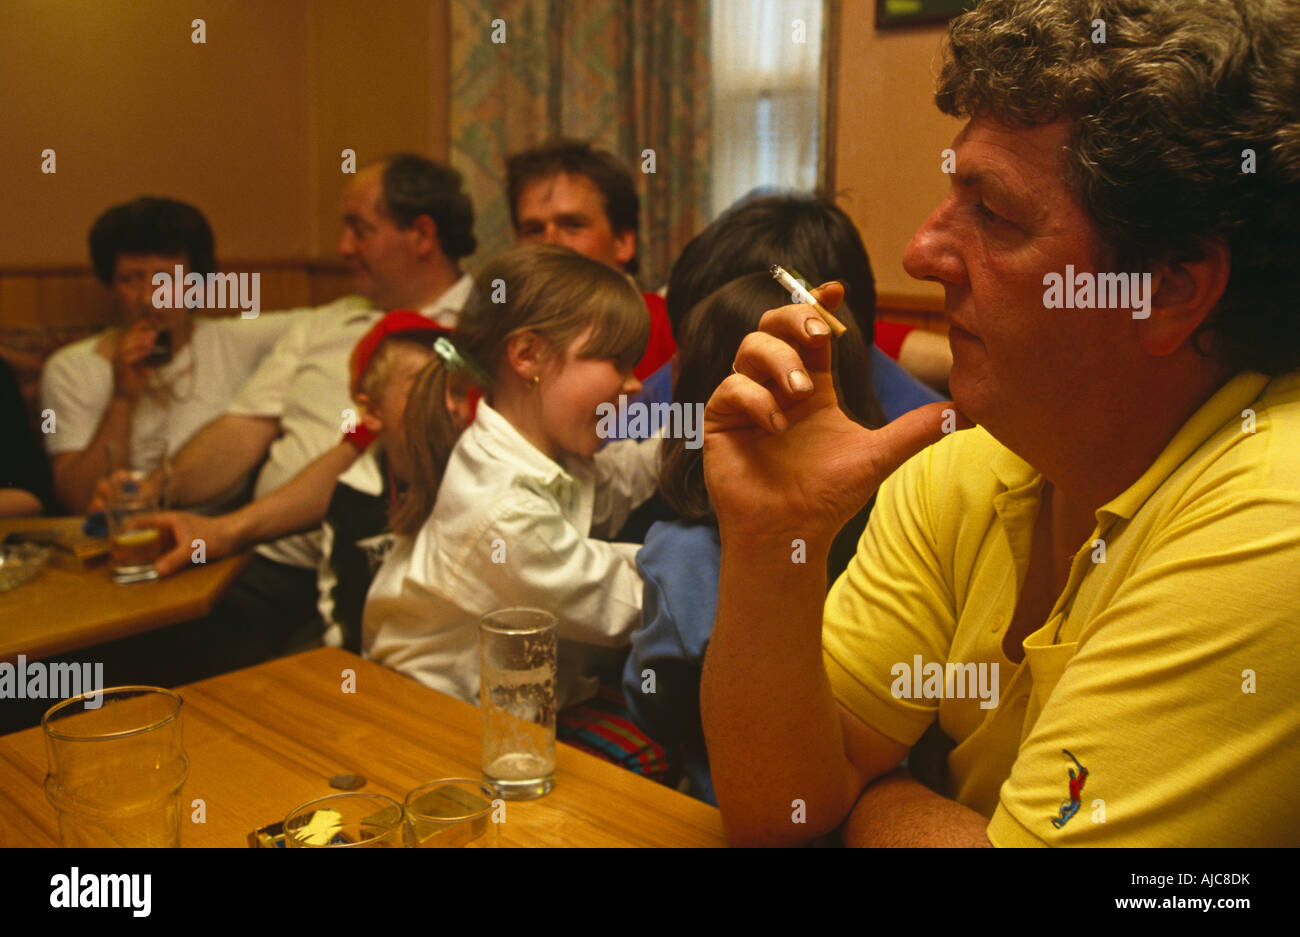 A father smokes lit cigarette indoors in front of children and friends during a night out in their local pub in Tarbet, Scotland Stock Photo